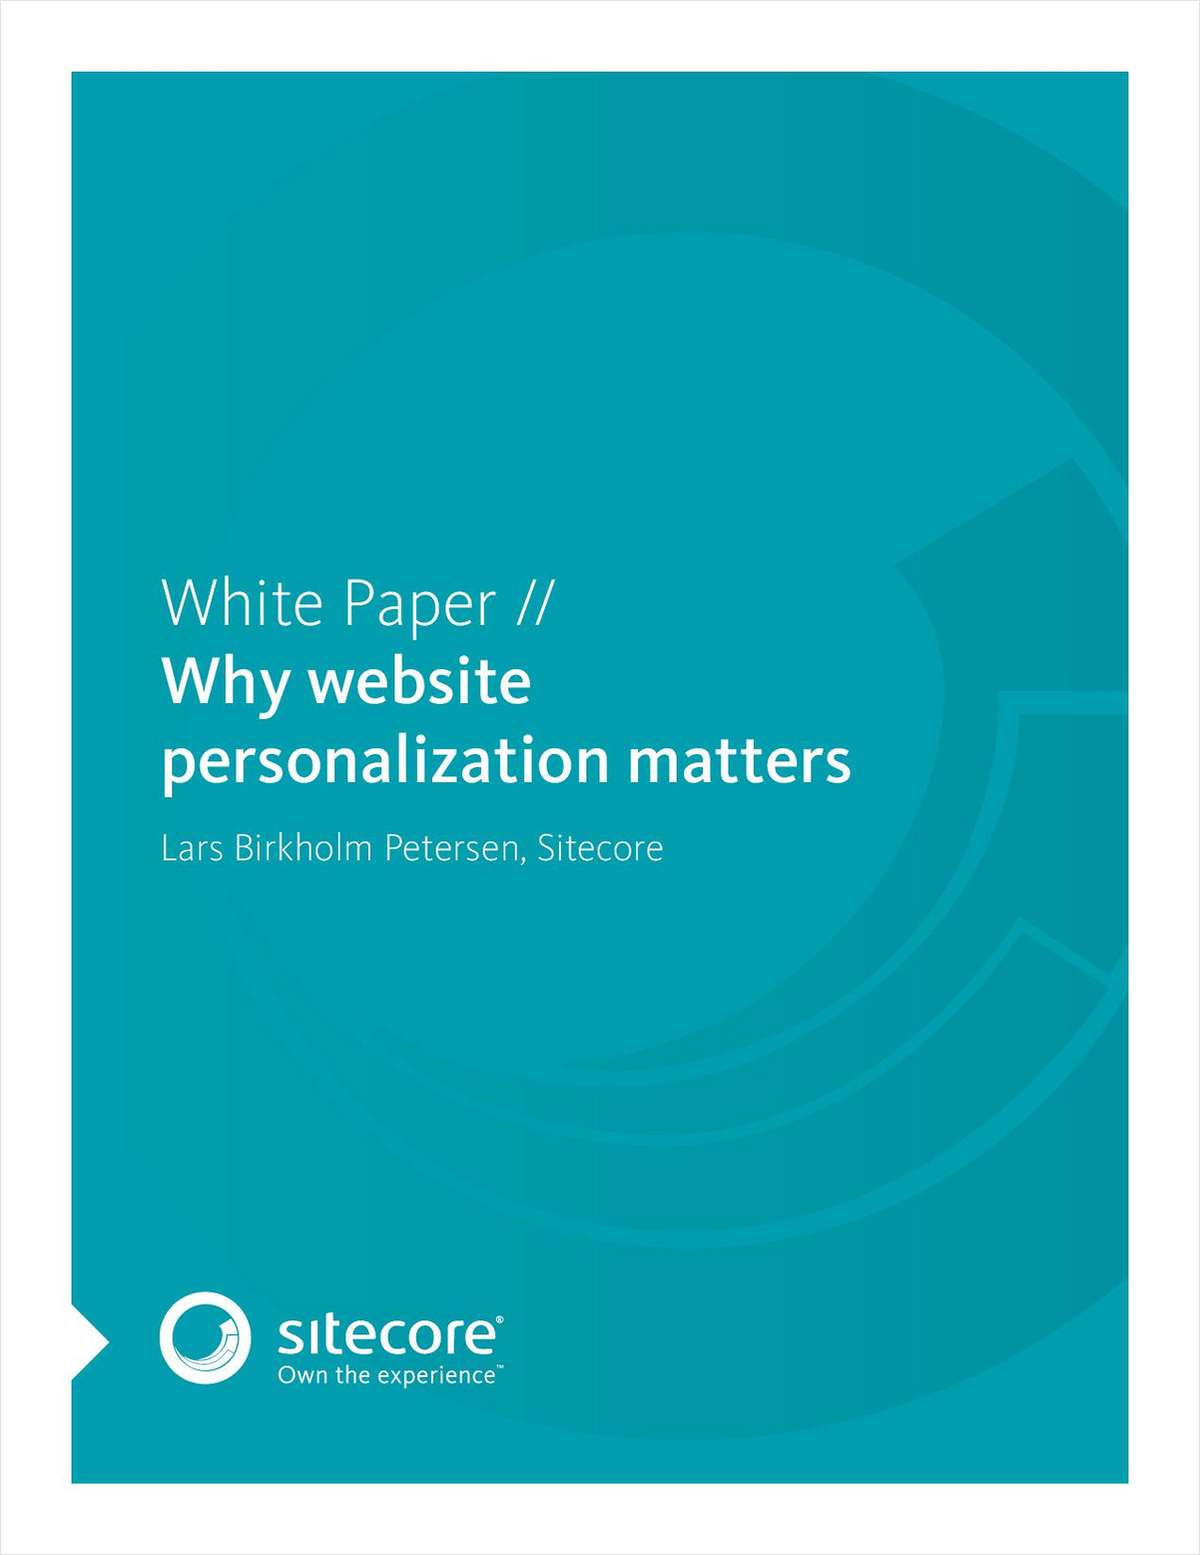 Why Website Personalization Matters